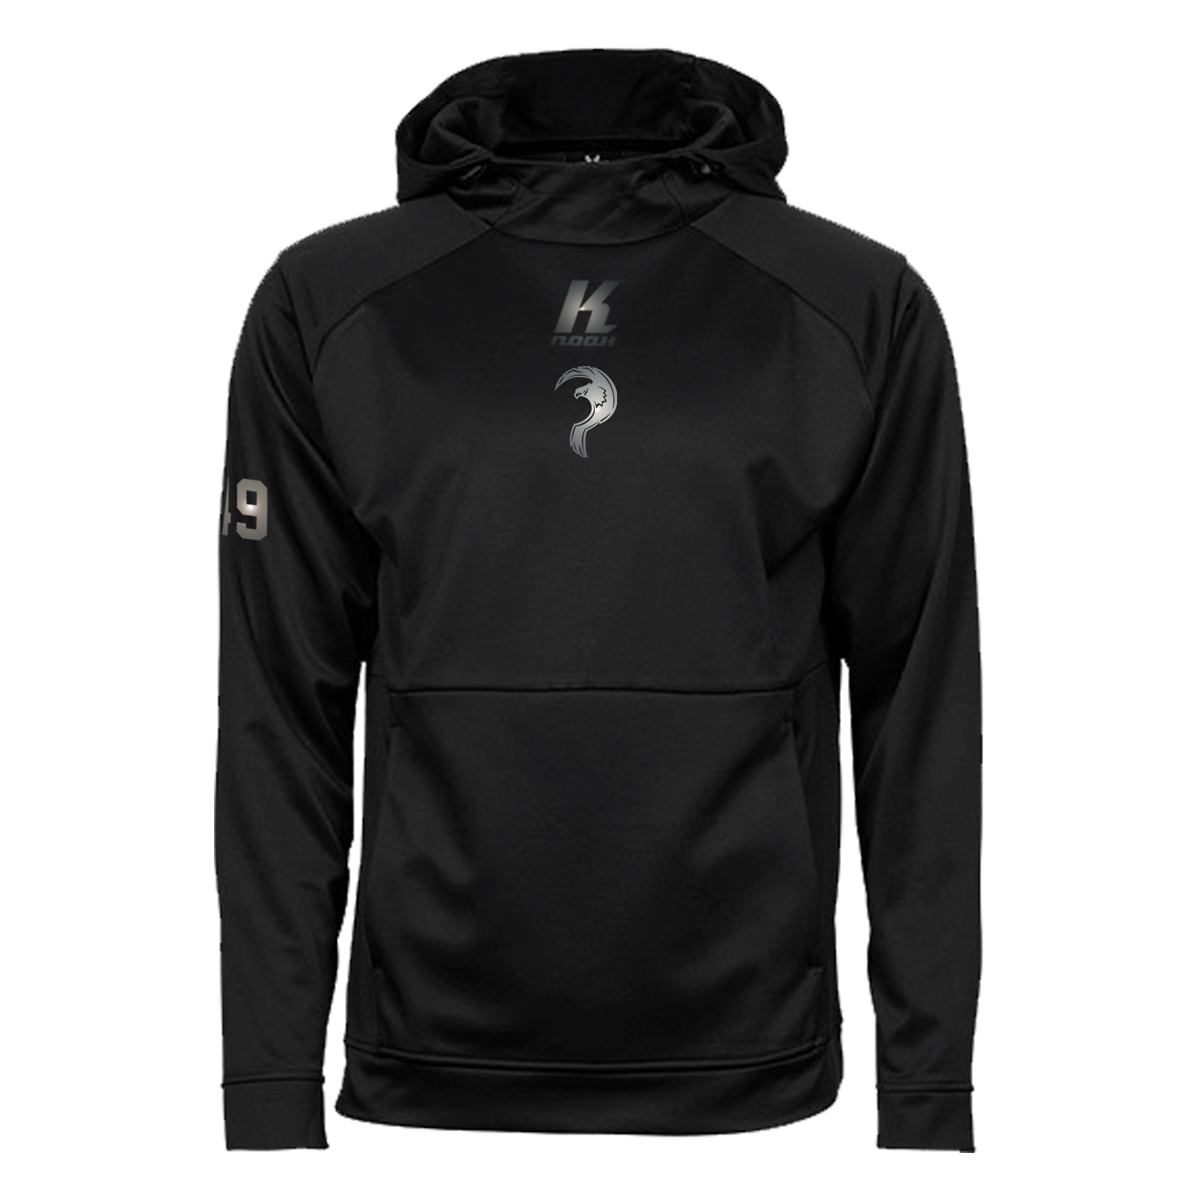 Patriots "Blackline" Performance Hoodie JH006 with Playernumber or Initials